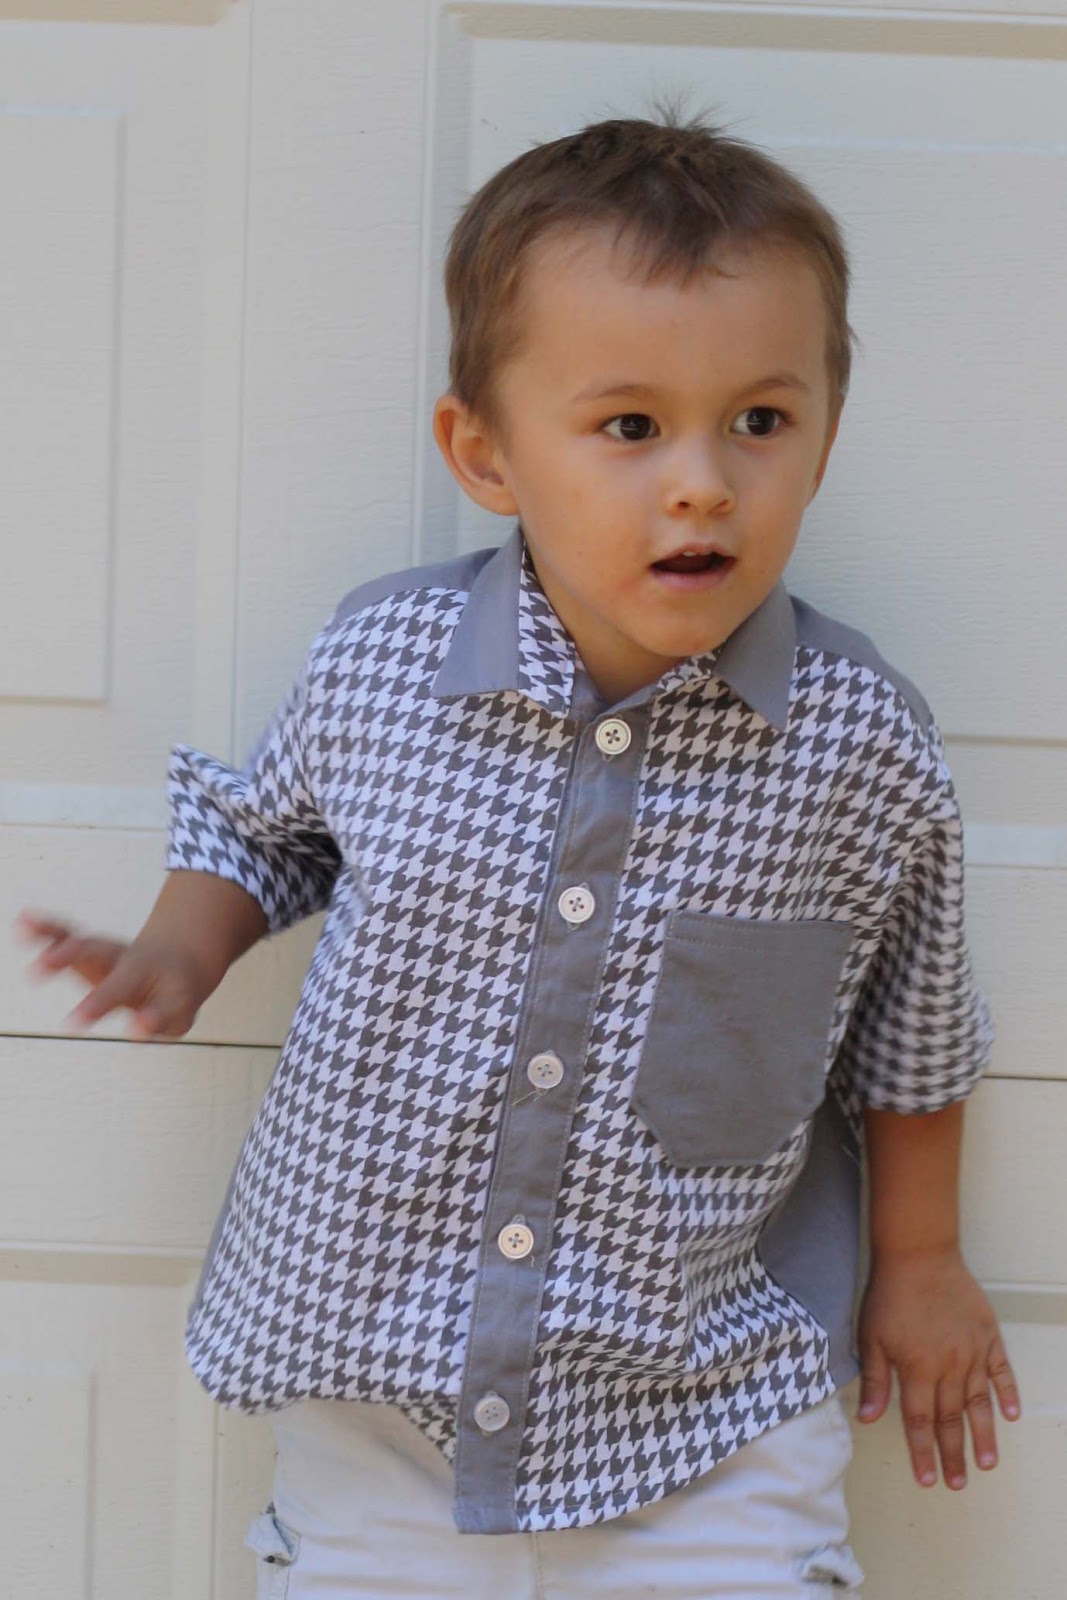 Tater's Gray Houndstooth Shirt - Melly Sews